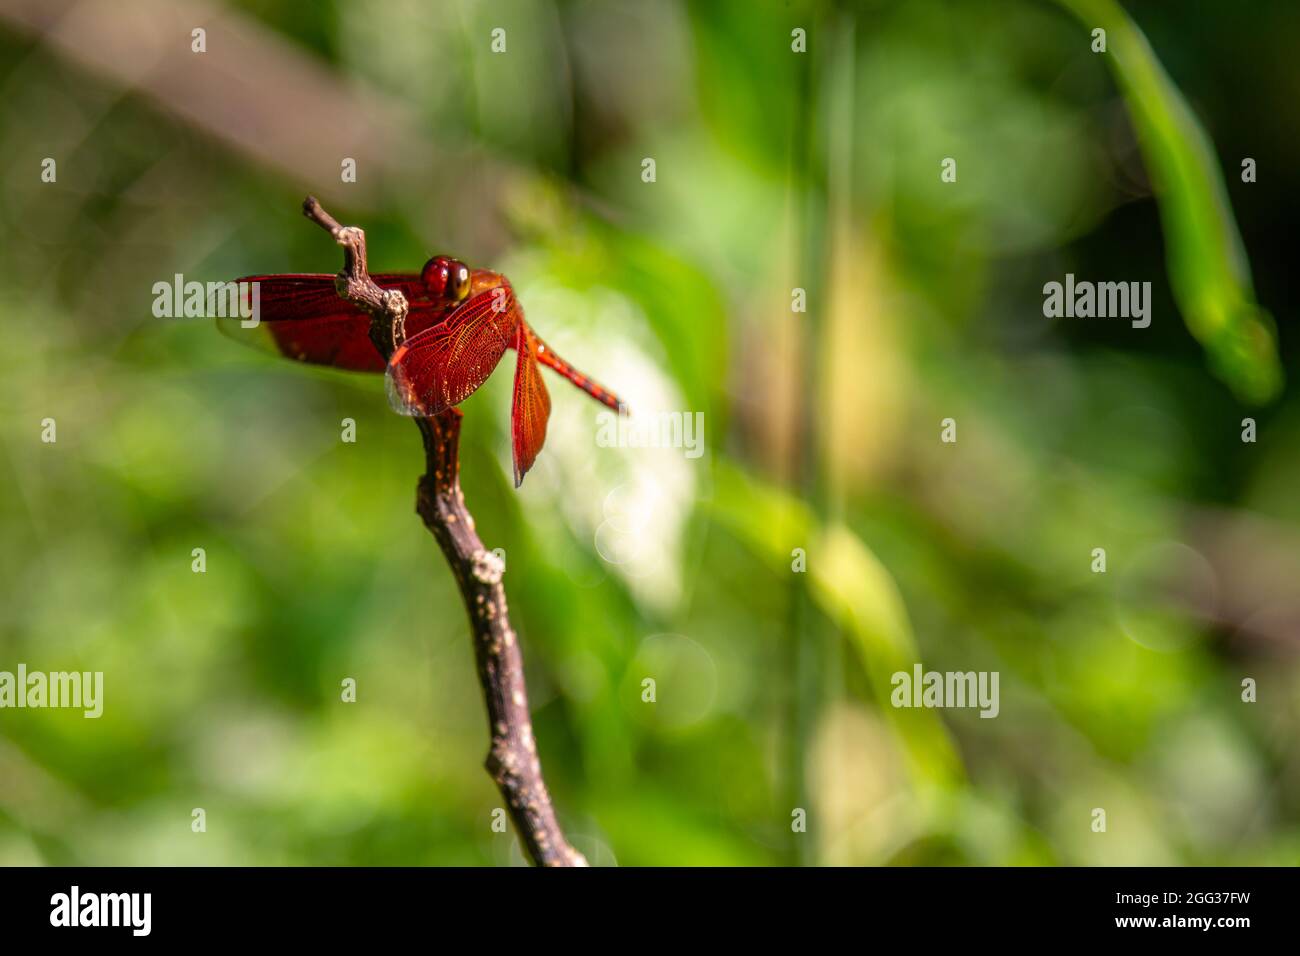 A red dragonfly lands on a fallen tree branch in the field Stock Photo